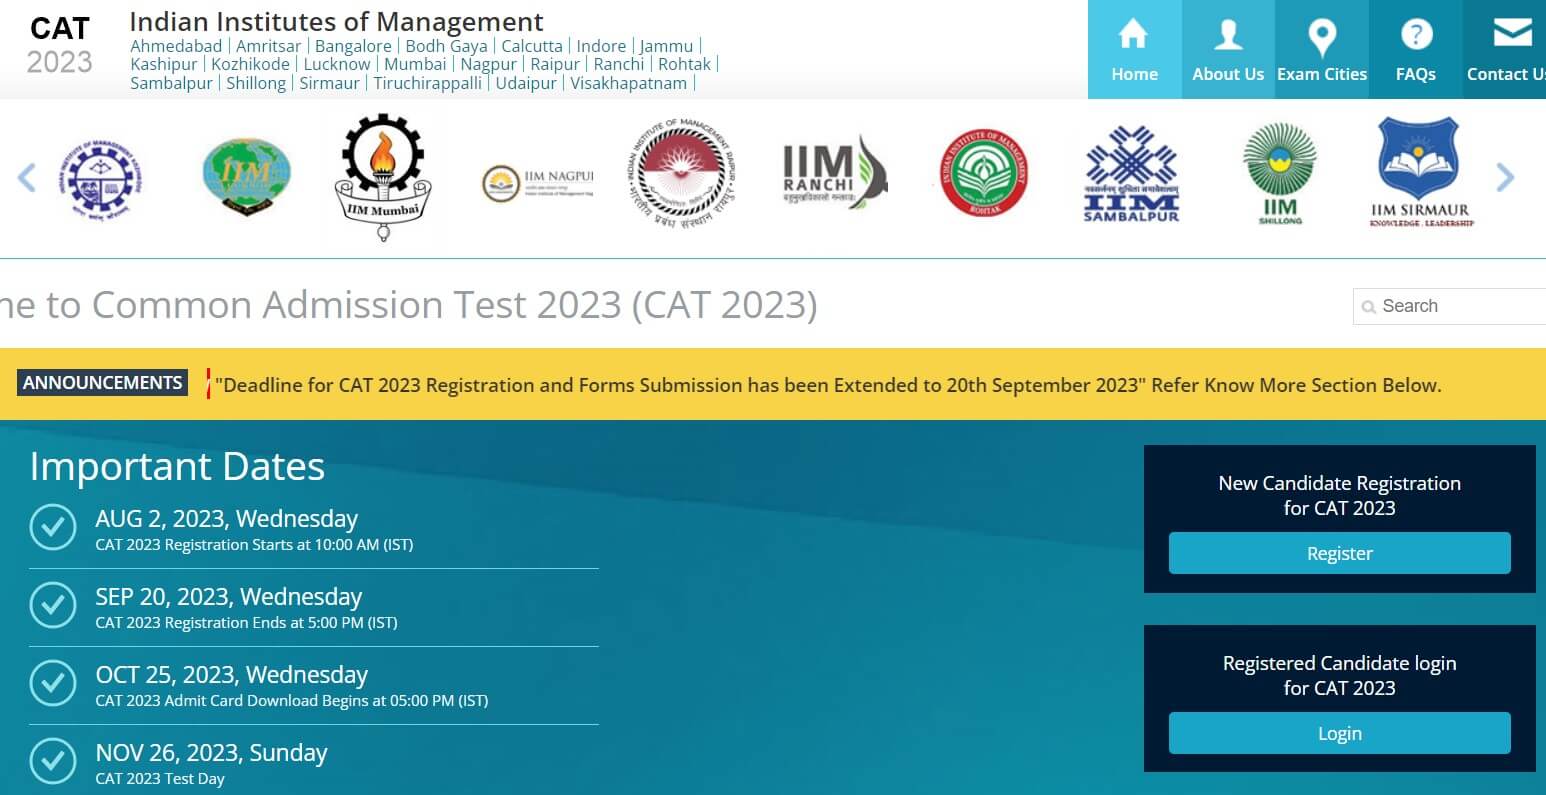 CAT 2023 registration date has been extended.